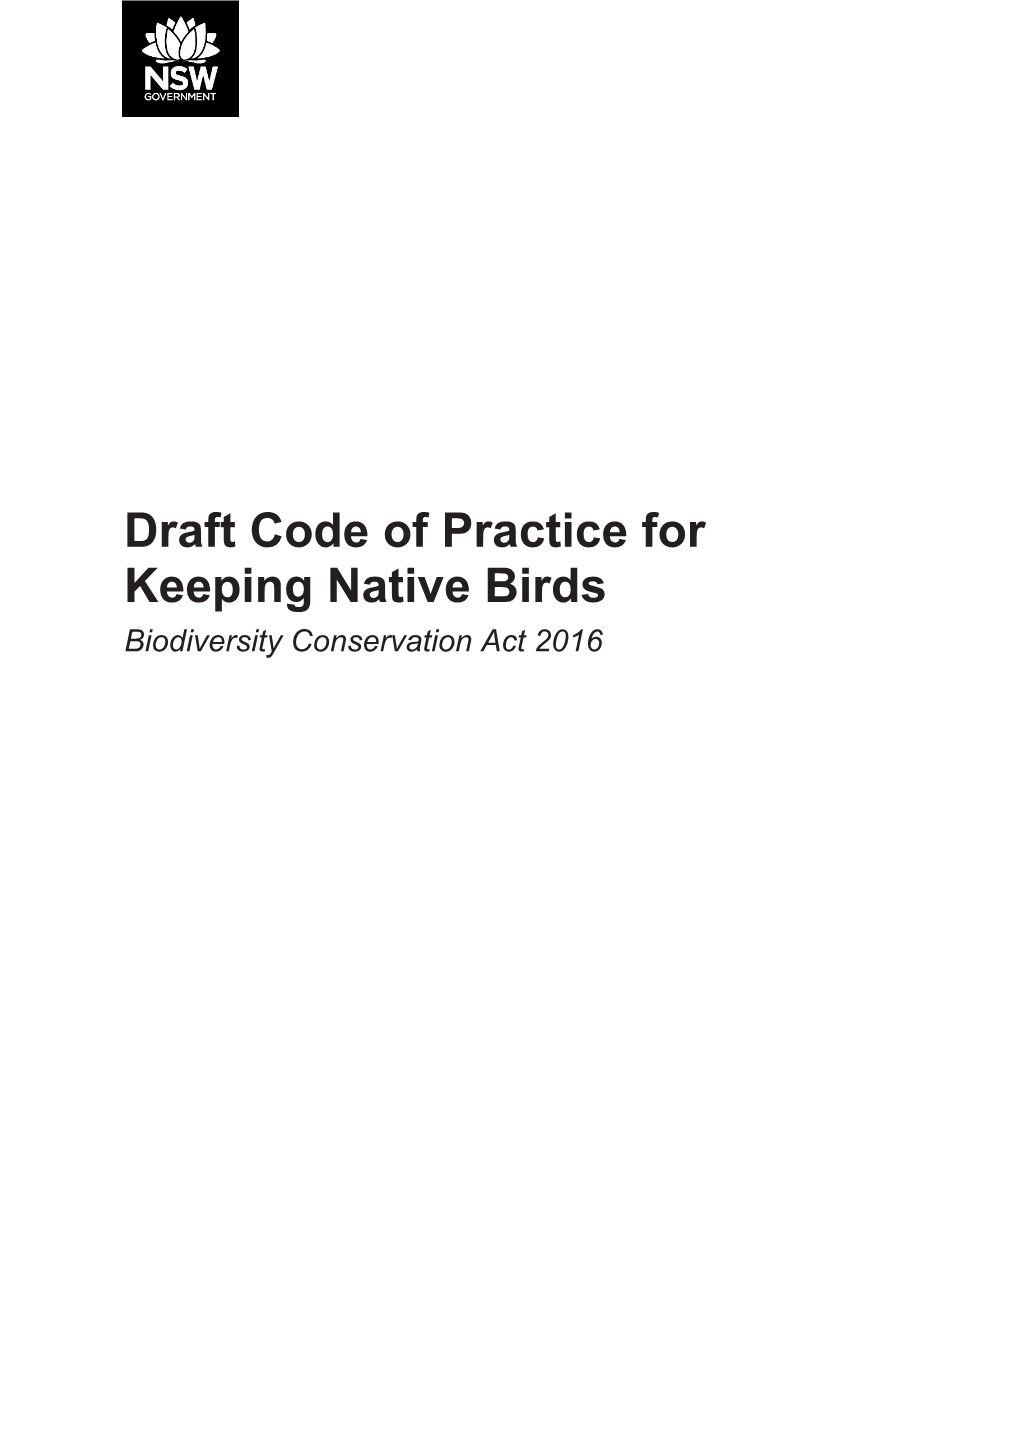 Draft Code of Practice for Keeping Native Birds Biodiversity Conservation Act 2016